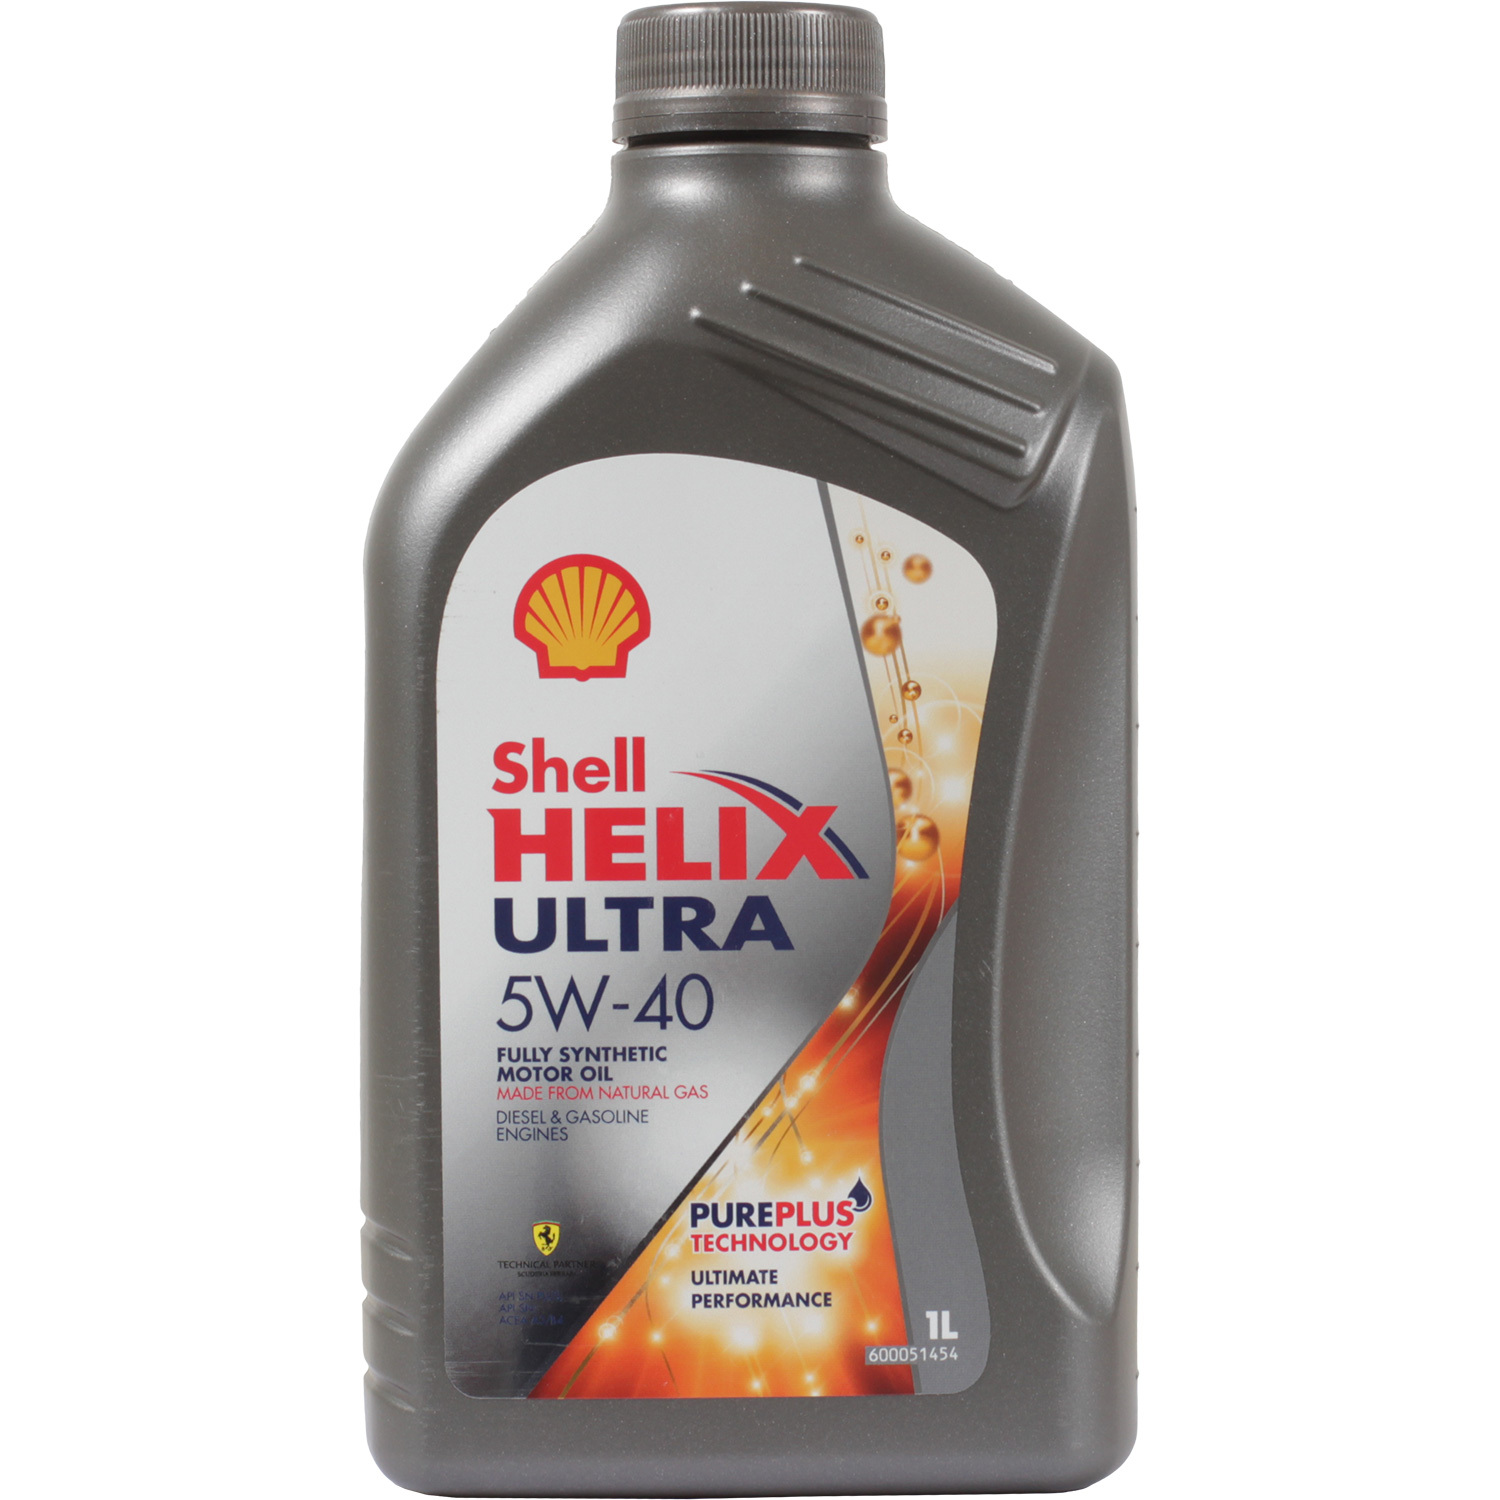 Shell Моторное масло Shell Helix Ultra 5W-40, 1 л hyundai масло моторное hyundai xteer gasoline ultra protection 5w 40 4л